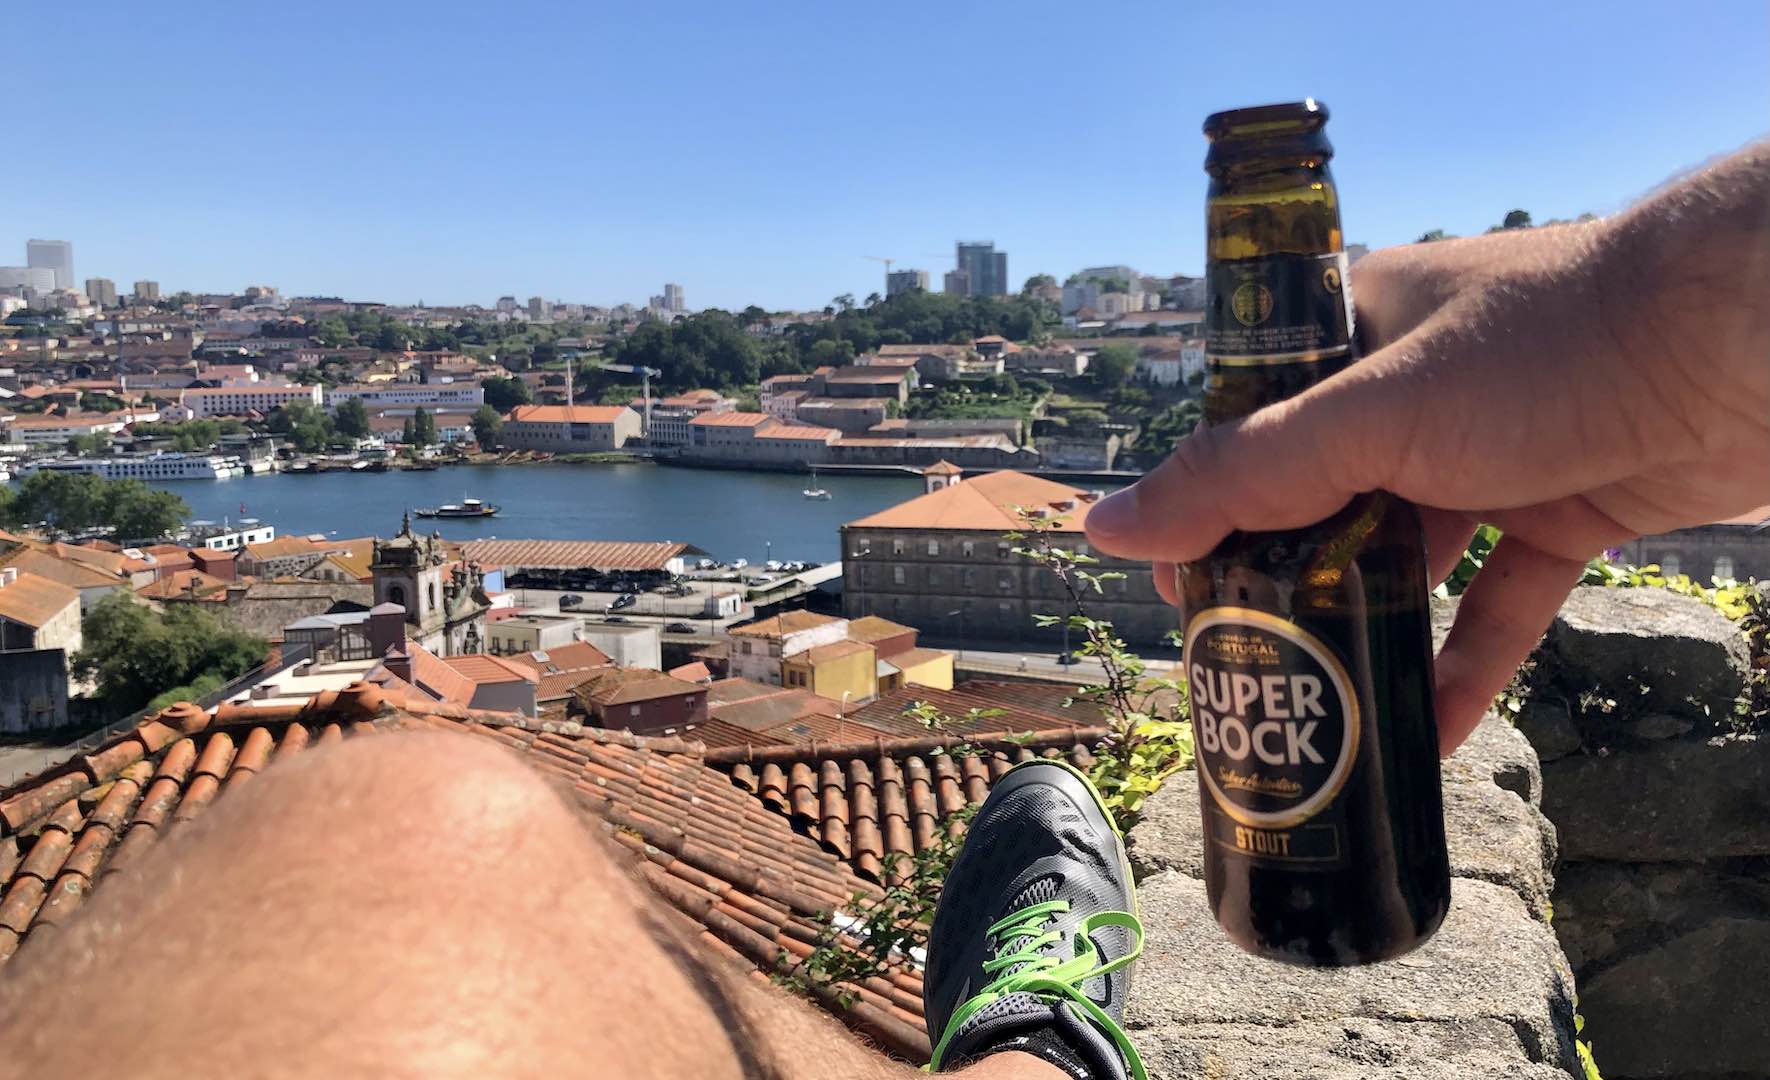 Cheers from the rooftops overlooking Porto!